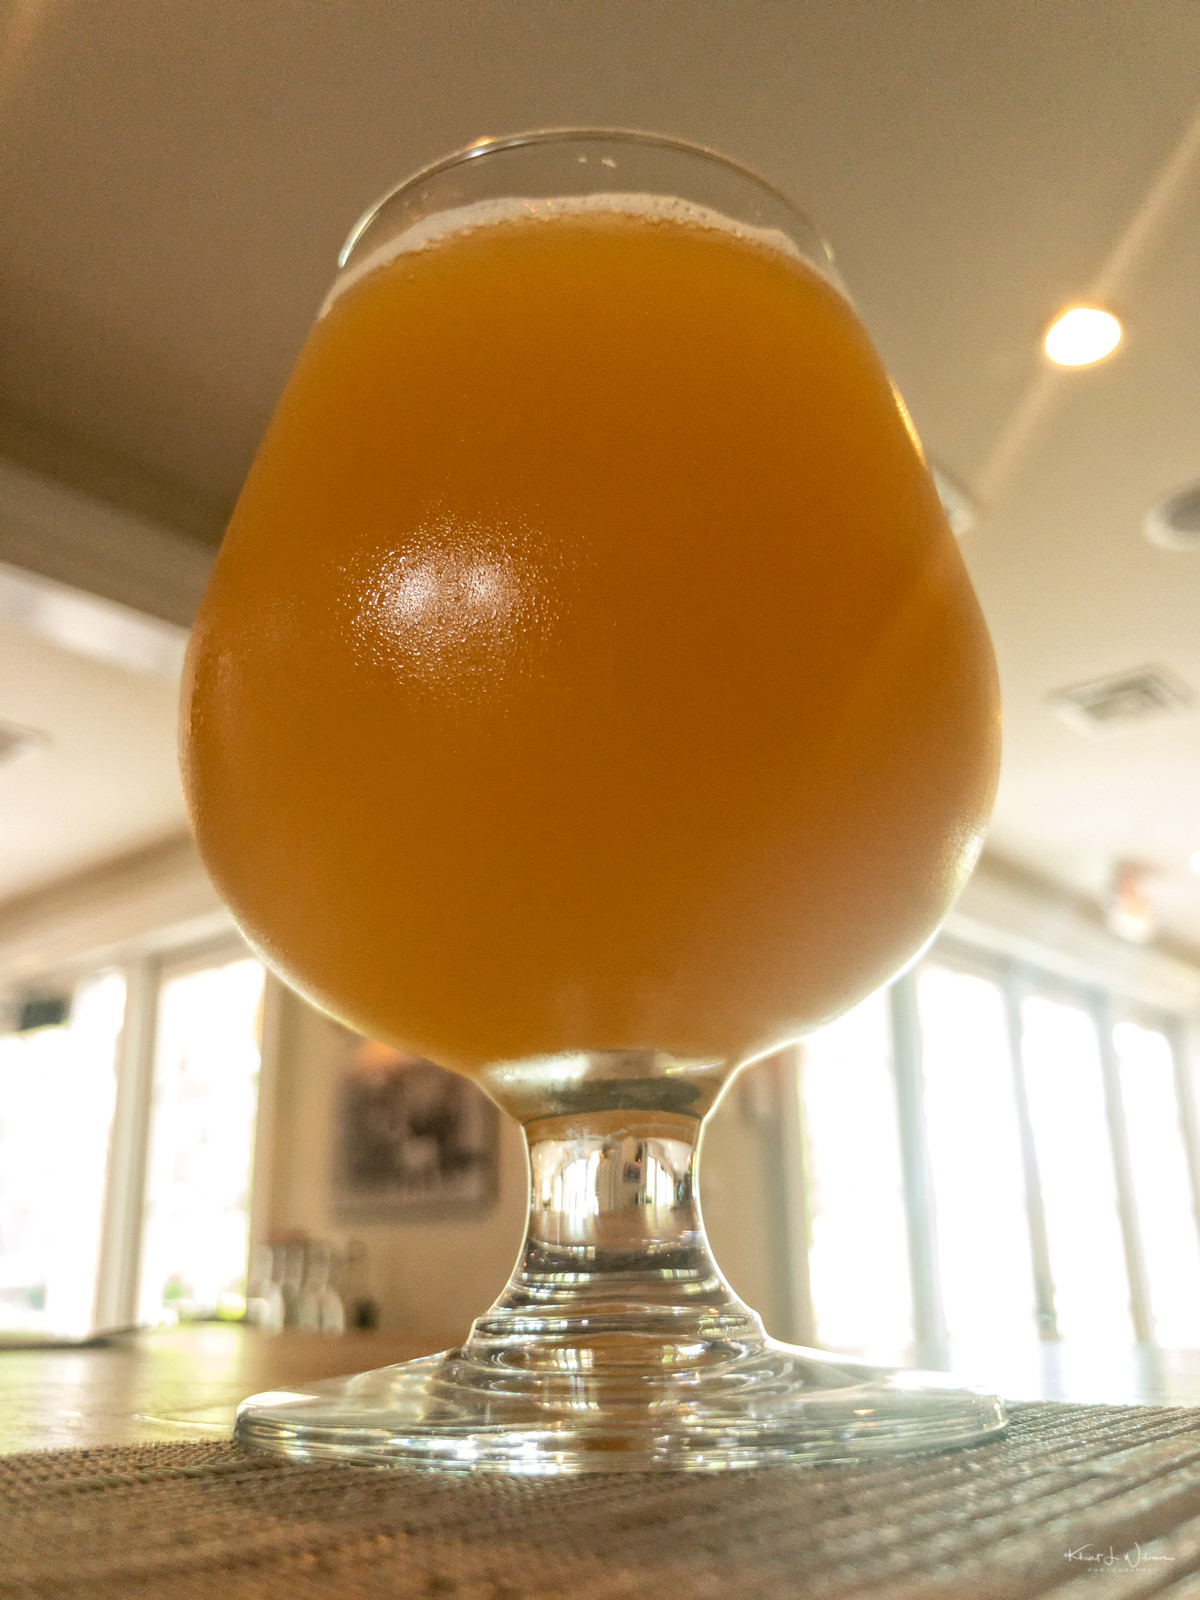 Icarus Brewing's Milking It